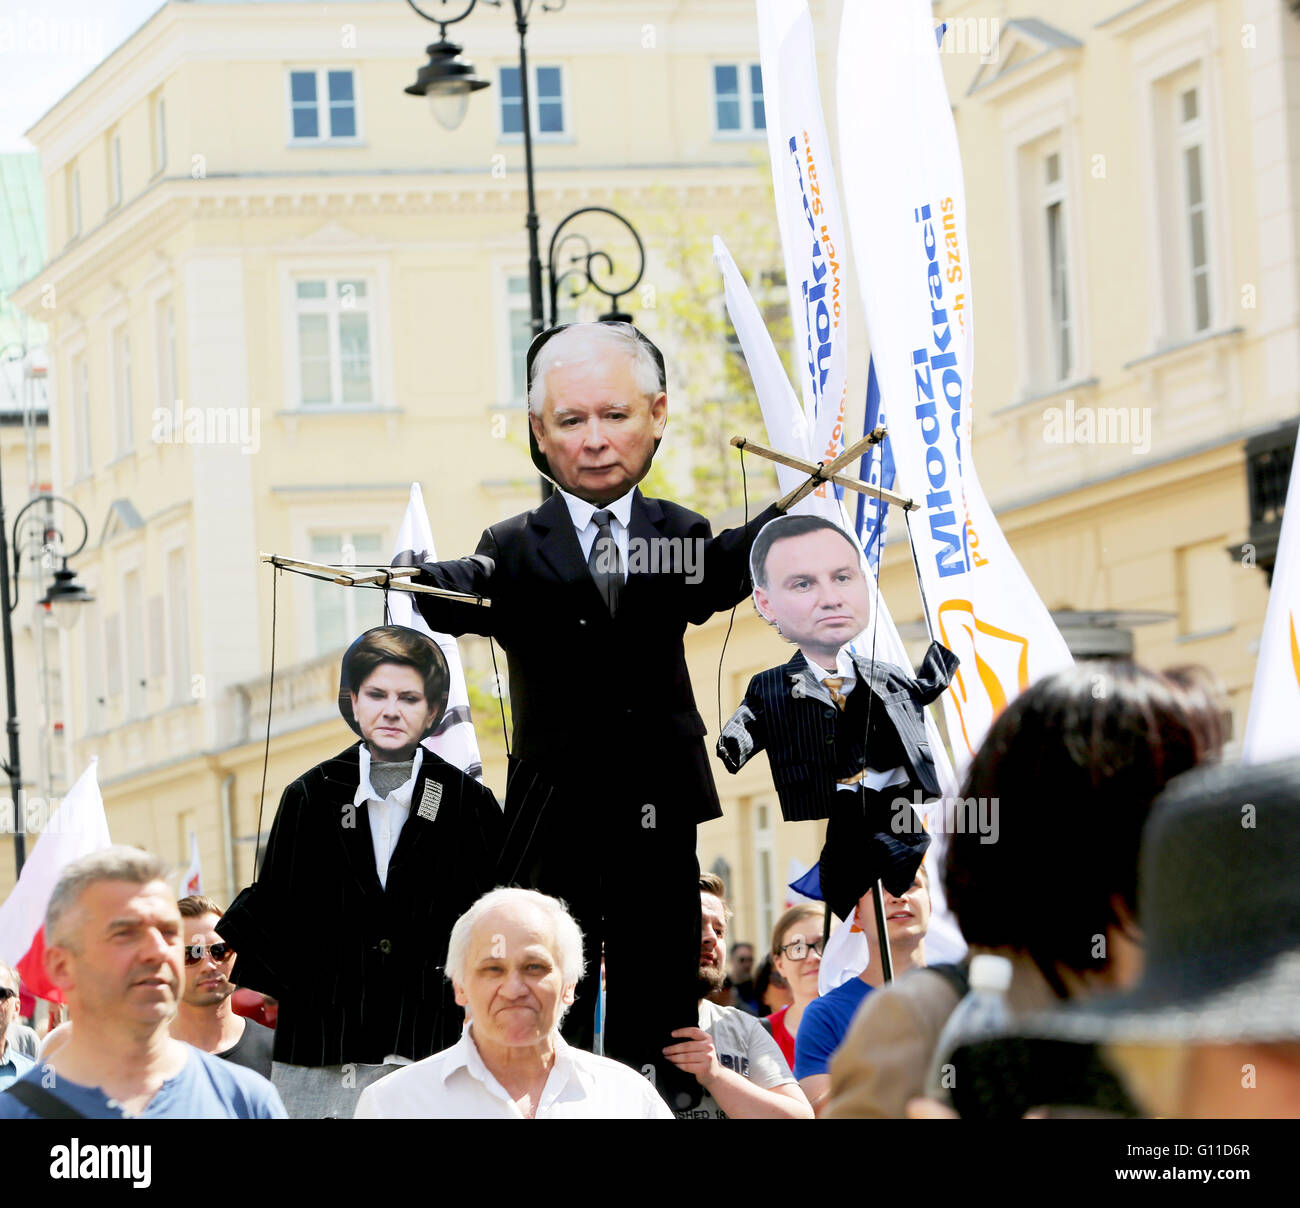 Warsaw, Poland. 07th May, 2016. An effigy of the leader of the Law & Justice Party (PiS), Jaroslaw Kaczynski holding Premier Beato Szydlo and Polish President Andrzej Duda as puppets is seen during a massive protest in Warsaw, Poland. Several hundred thousand people gathered for a demonstration organized by the Committee to Protect Democracy (KOD) and the political opposition parties in Warsaw, Poland on May 07 2016. Credit:  PACIFIC PRESS/Alamy Live News Stock Photo